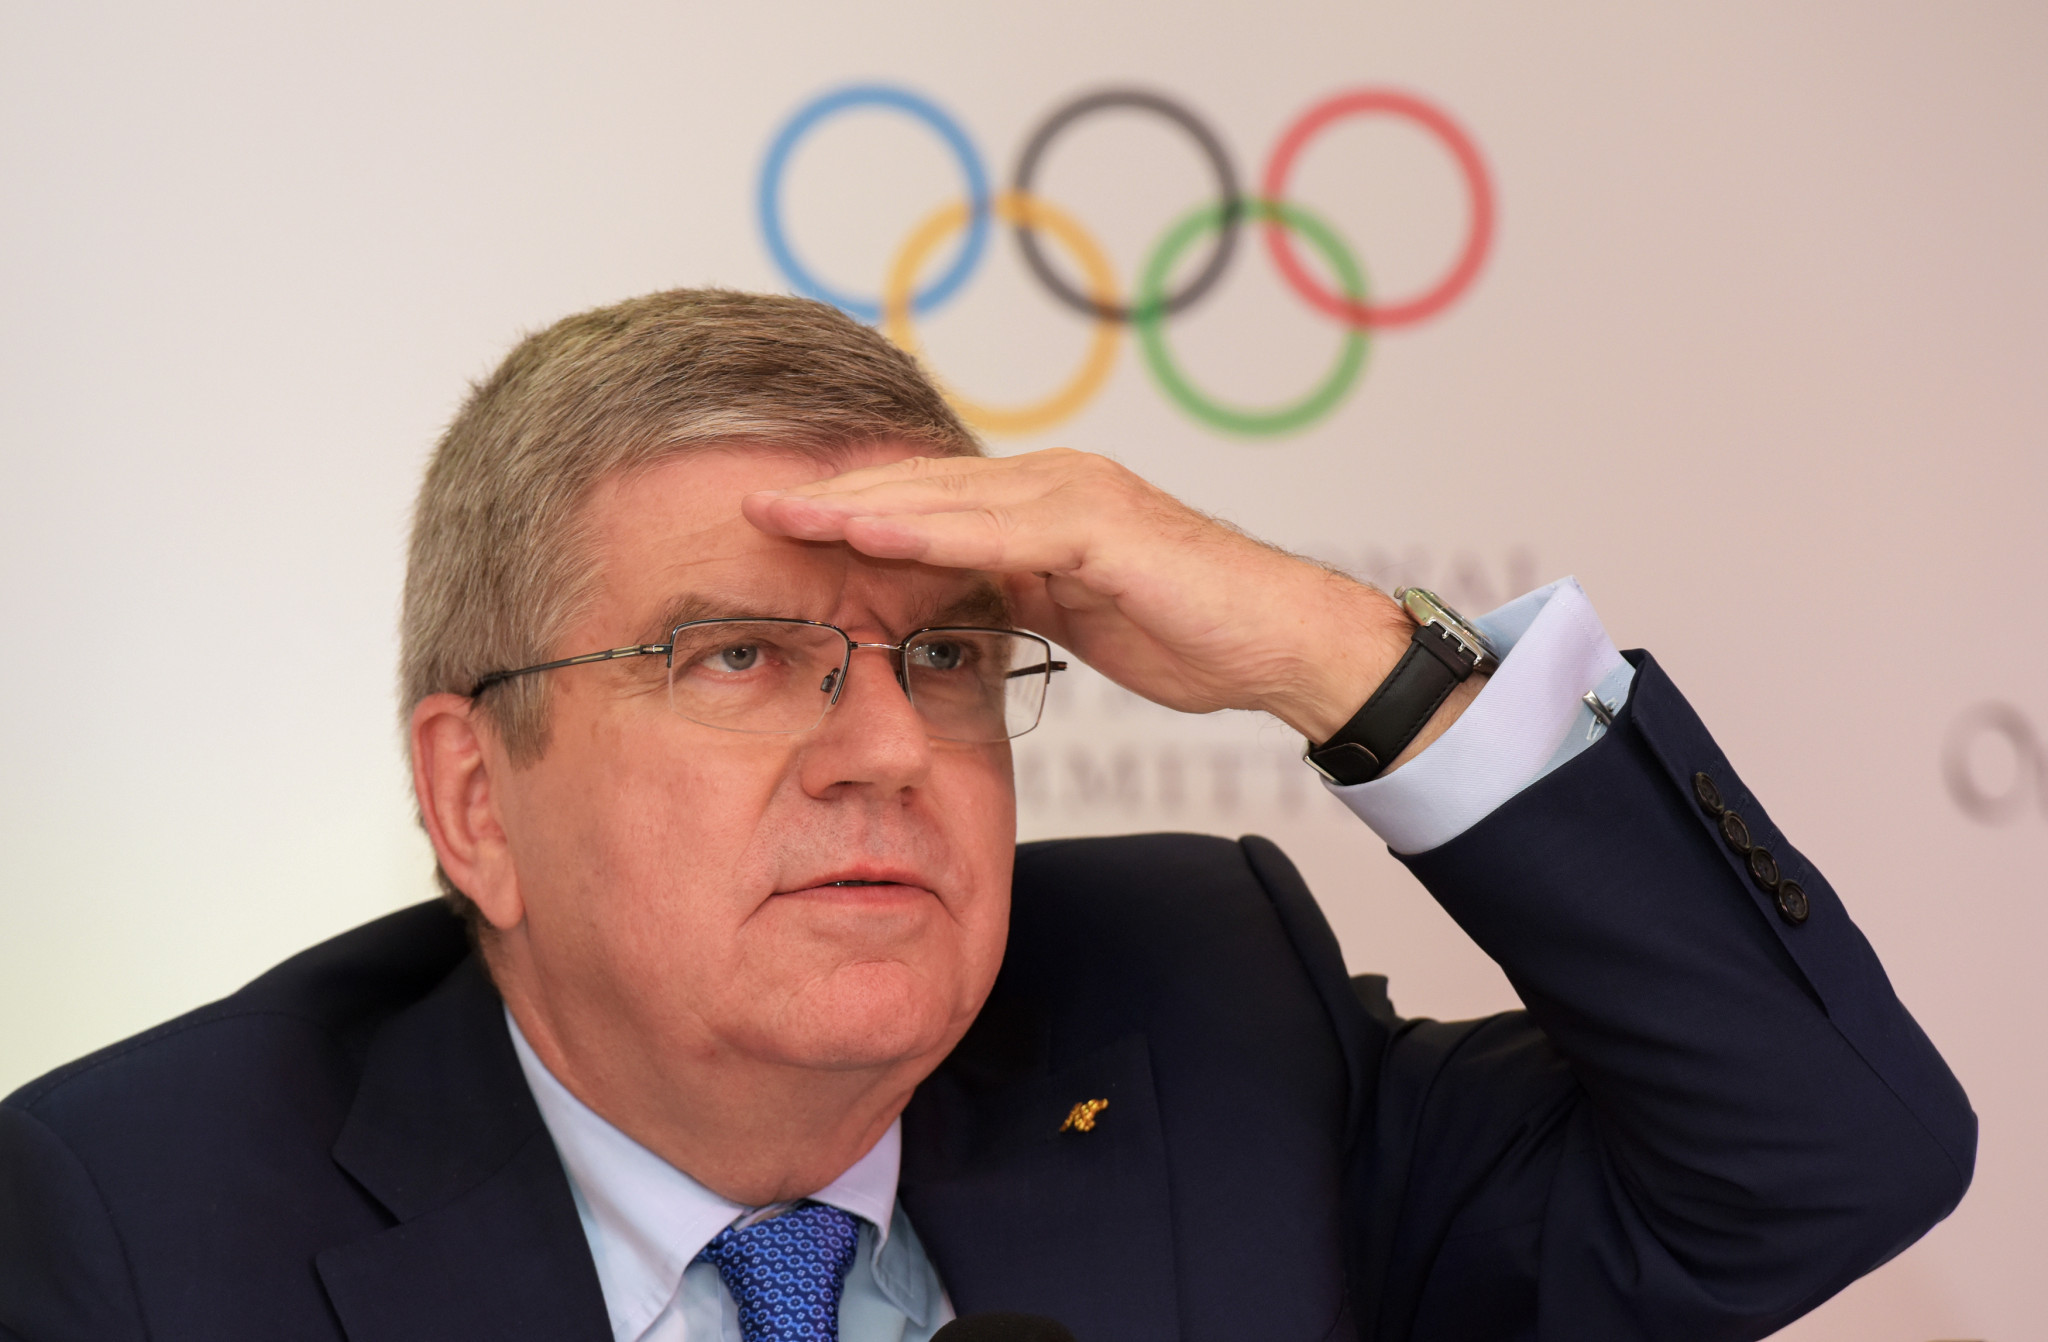 Thomas Bach called on German athletes to come and meet with him in Lausanne ©Getty Images